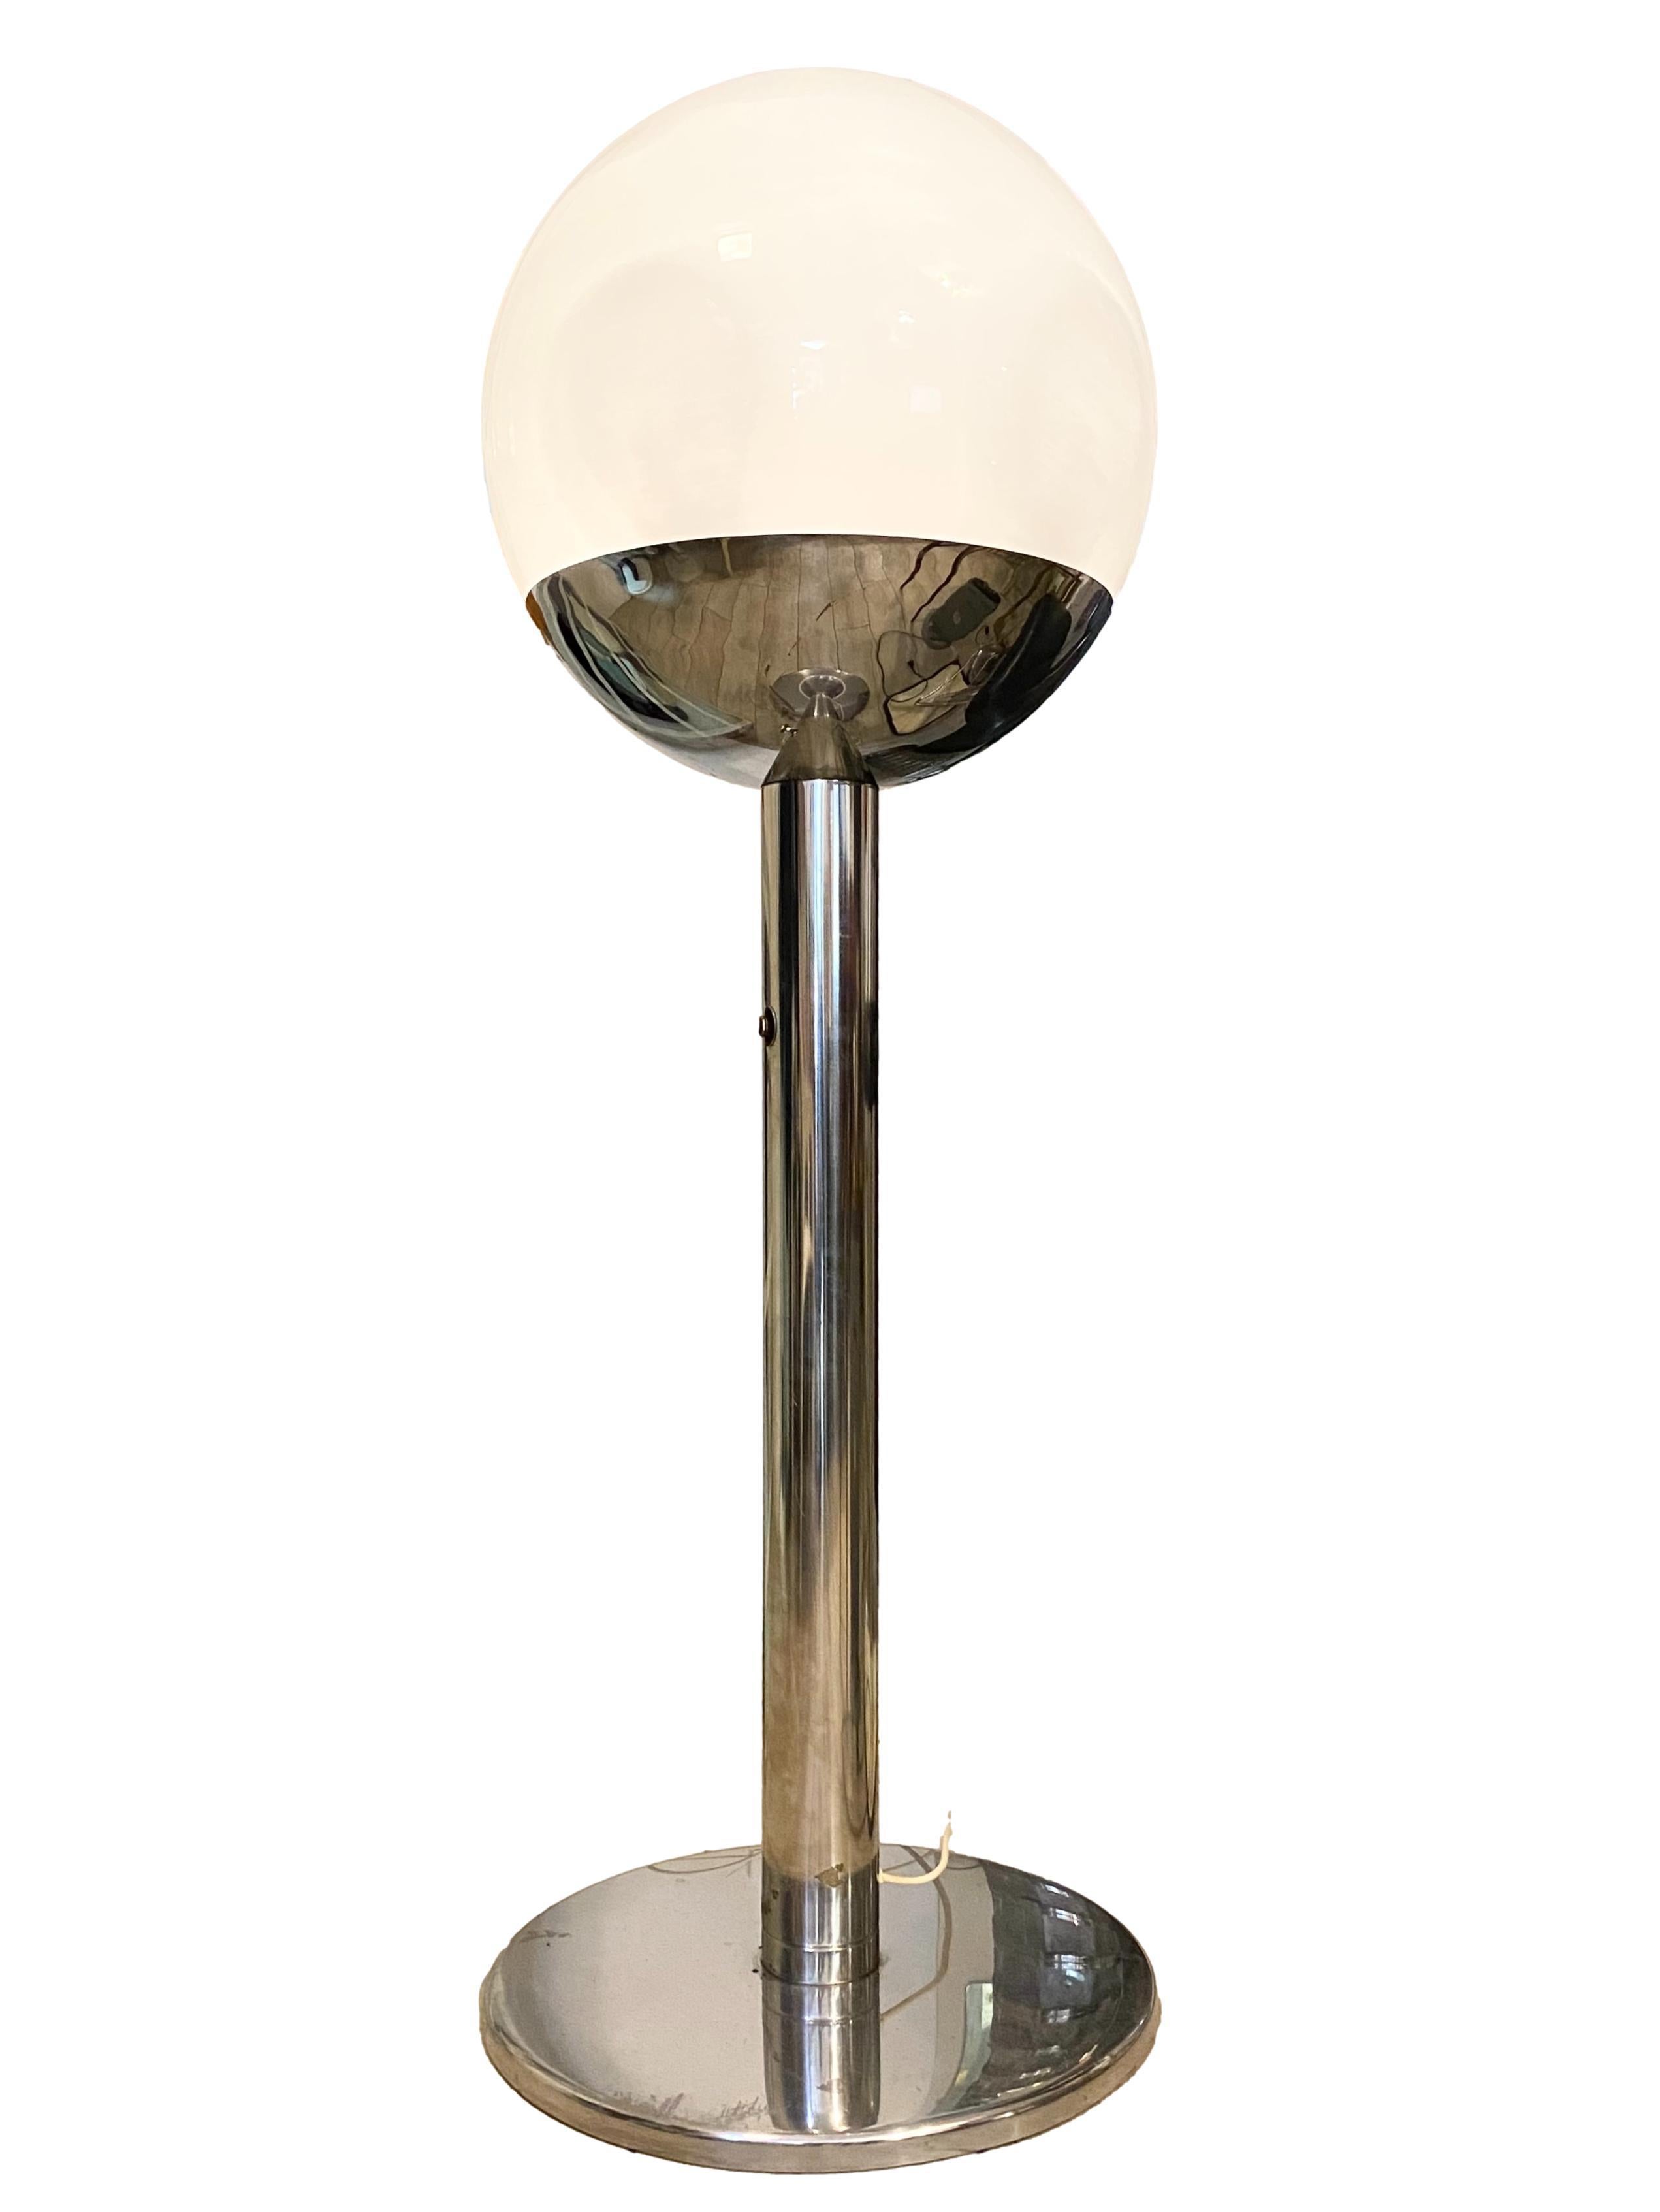 Floor lamp from the 1970s, model P428 designed by Pia Guidetti Crippa for Luci Italia, structure in chromium-plated steel, diffuser in white glass, light dimmer that makes it possible to switch from strong to soft light. The lamp is composed of a